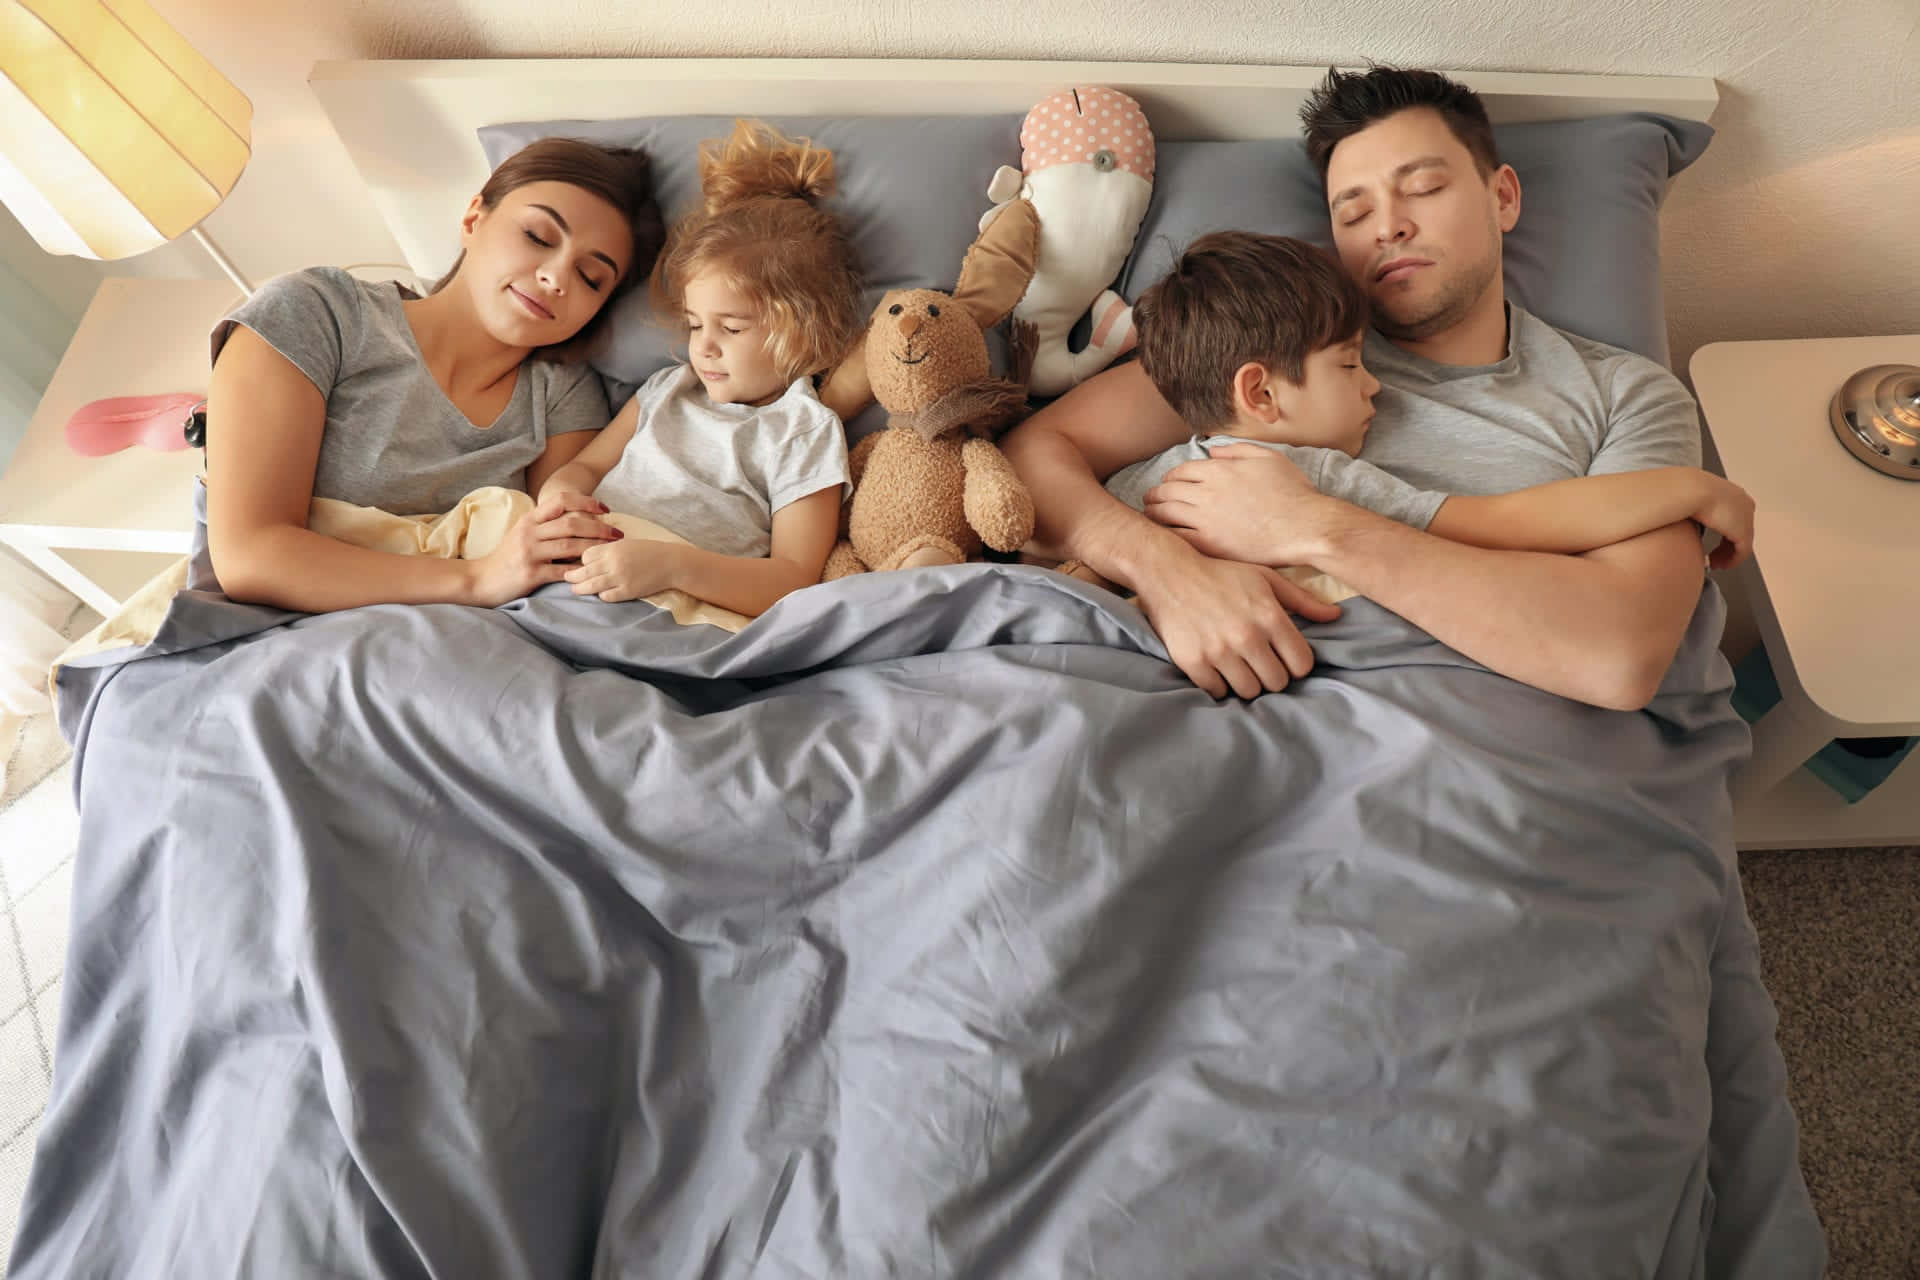 A Family Is Sleeping In Bed With A Teddy Bear